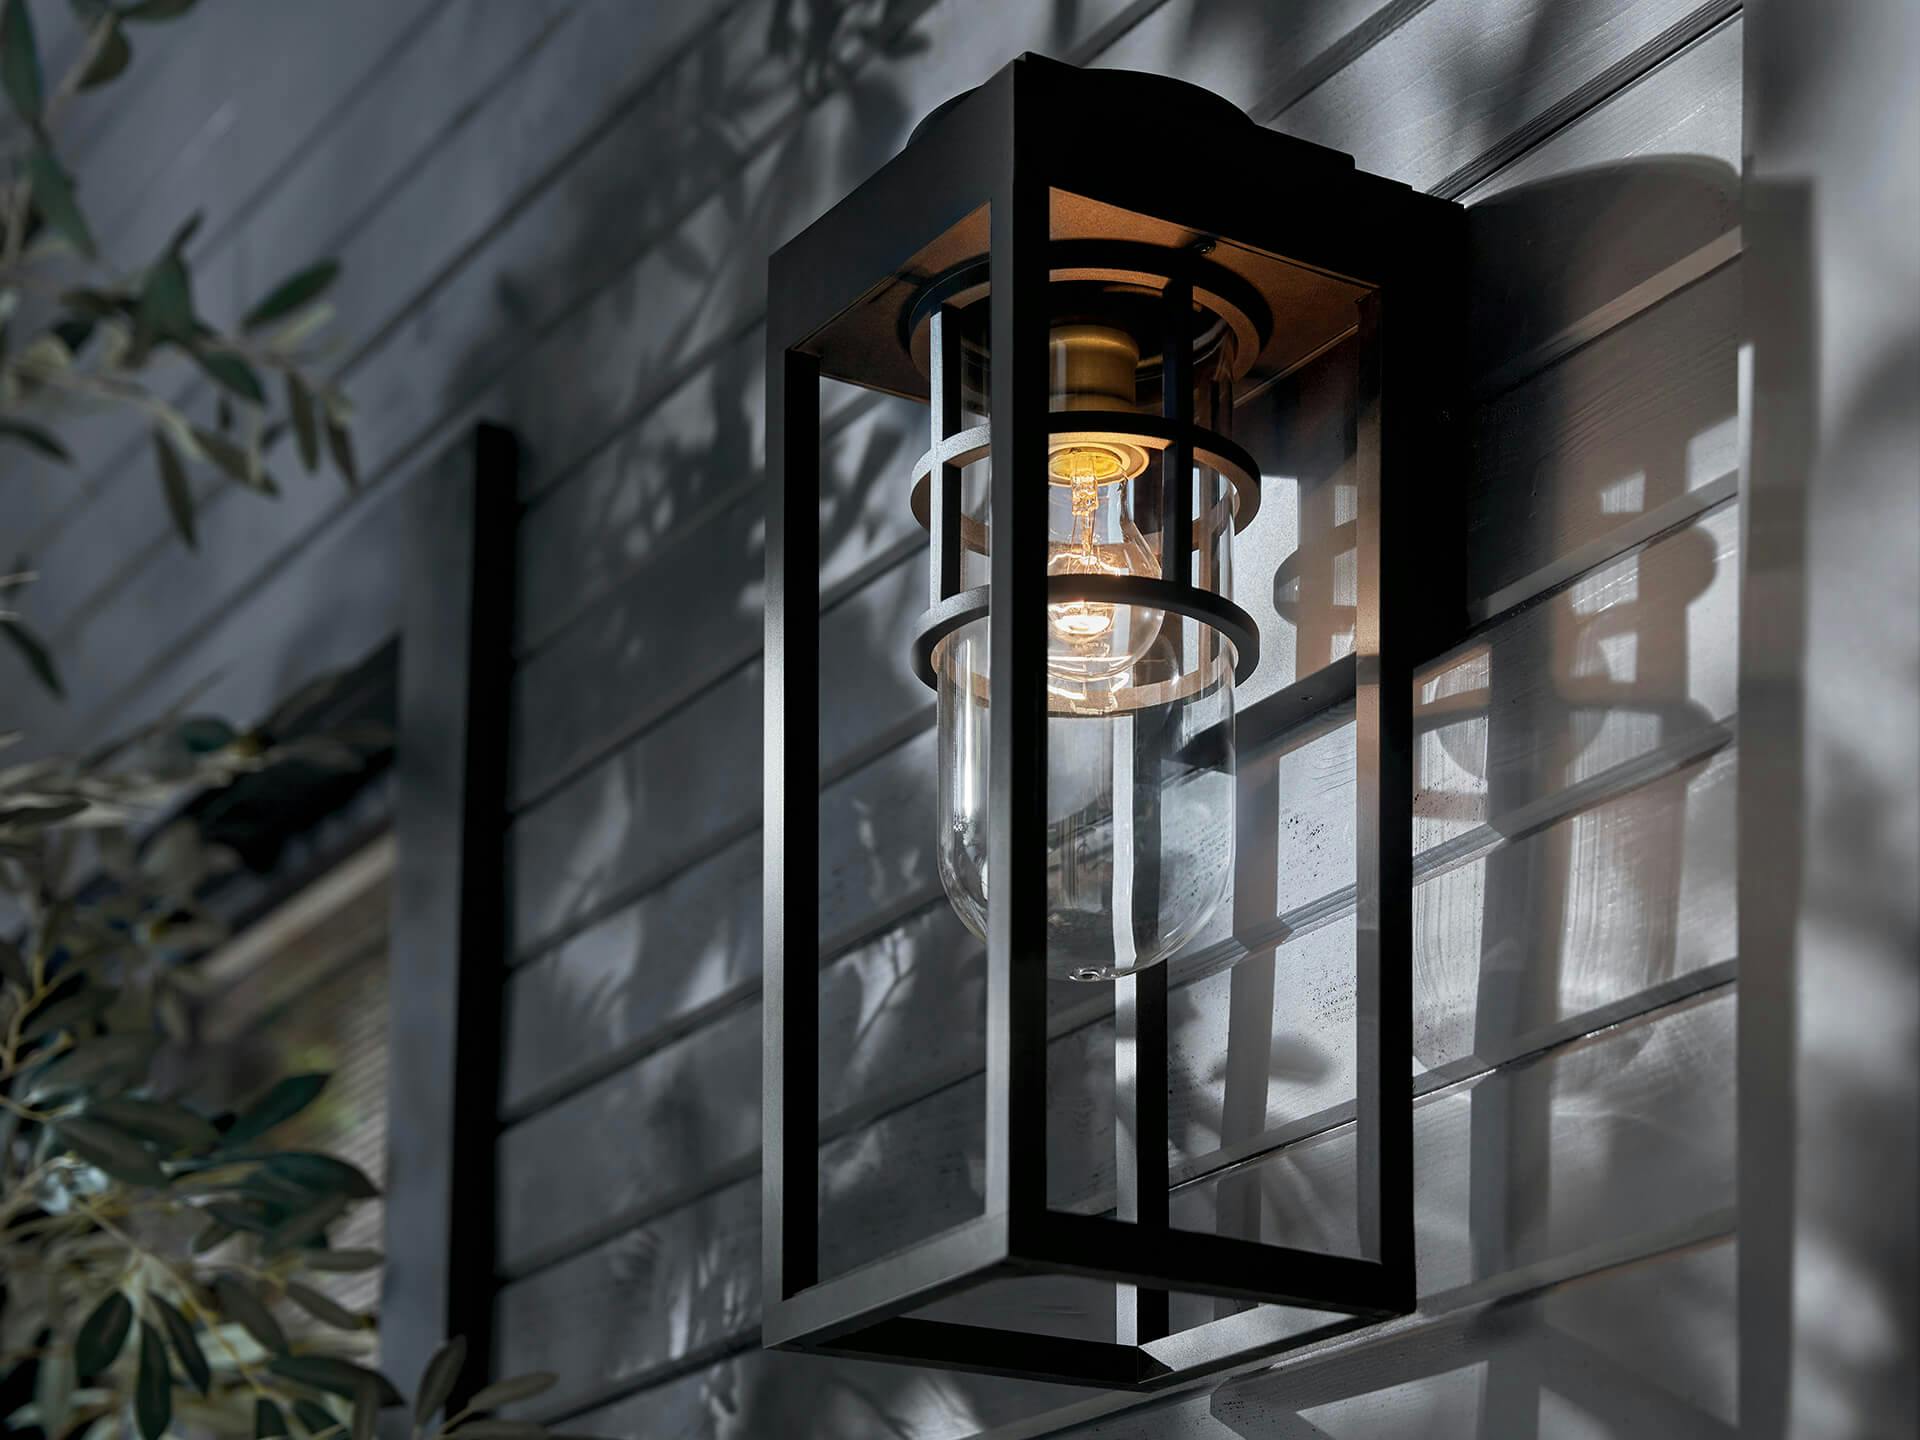 Close up of a Hone sconce in black at night